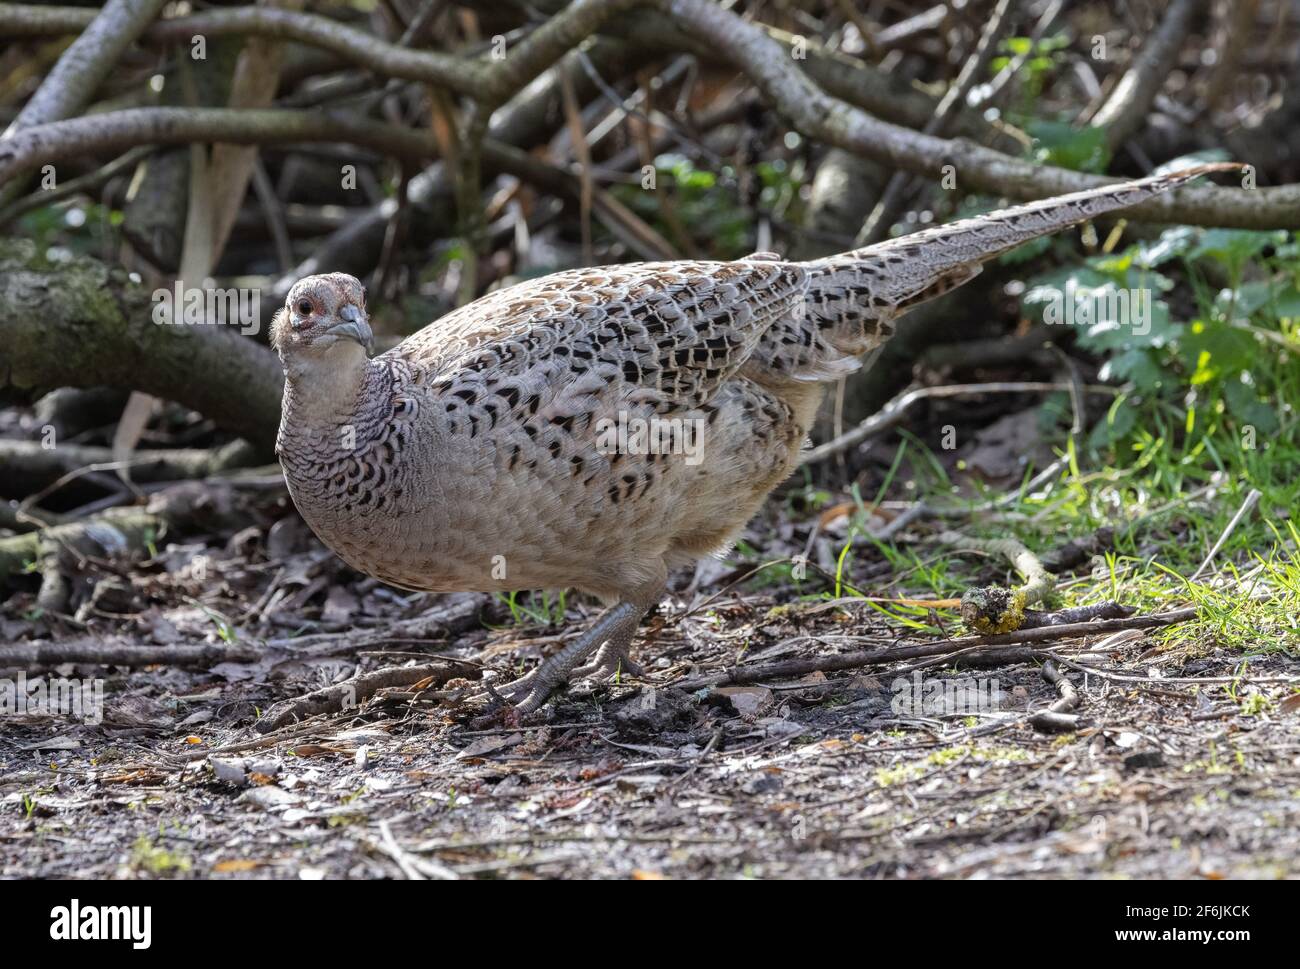 Female pheasant, Phasianus colchicus; one adult female pheasant, side view, in woodland, Lackford Lakes Suffolk England UK Stock Photo